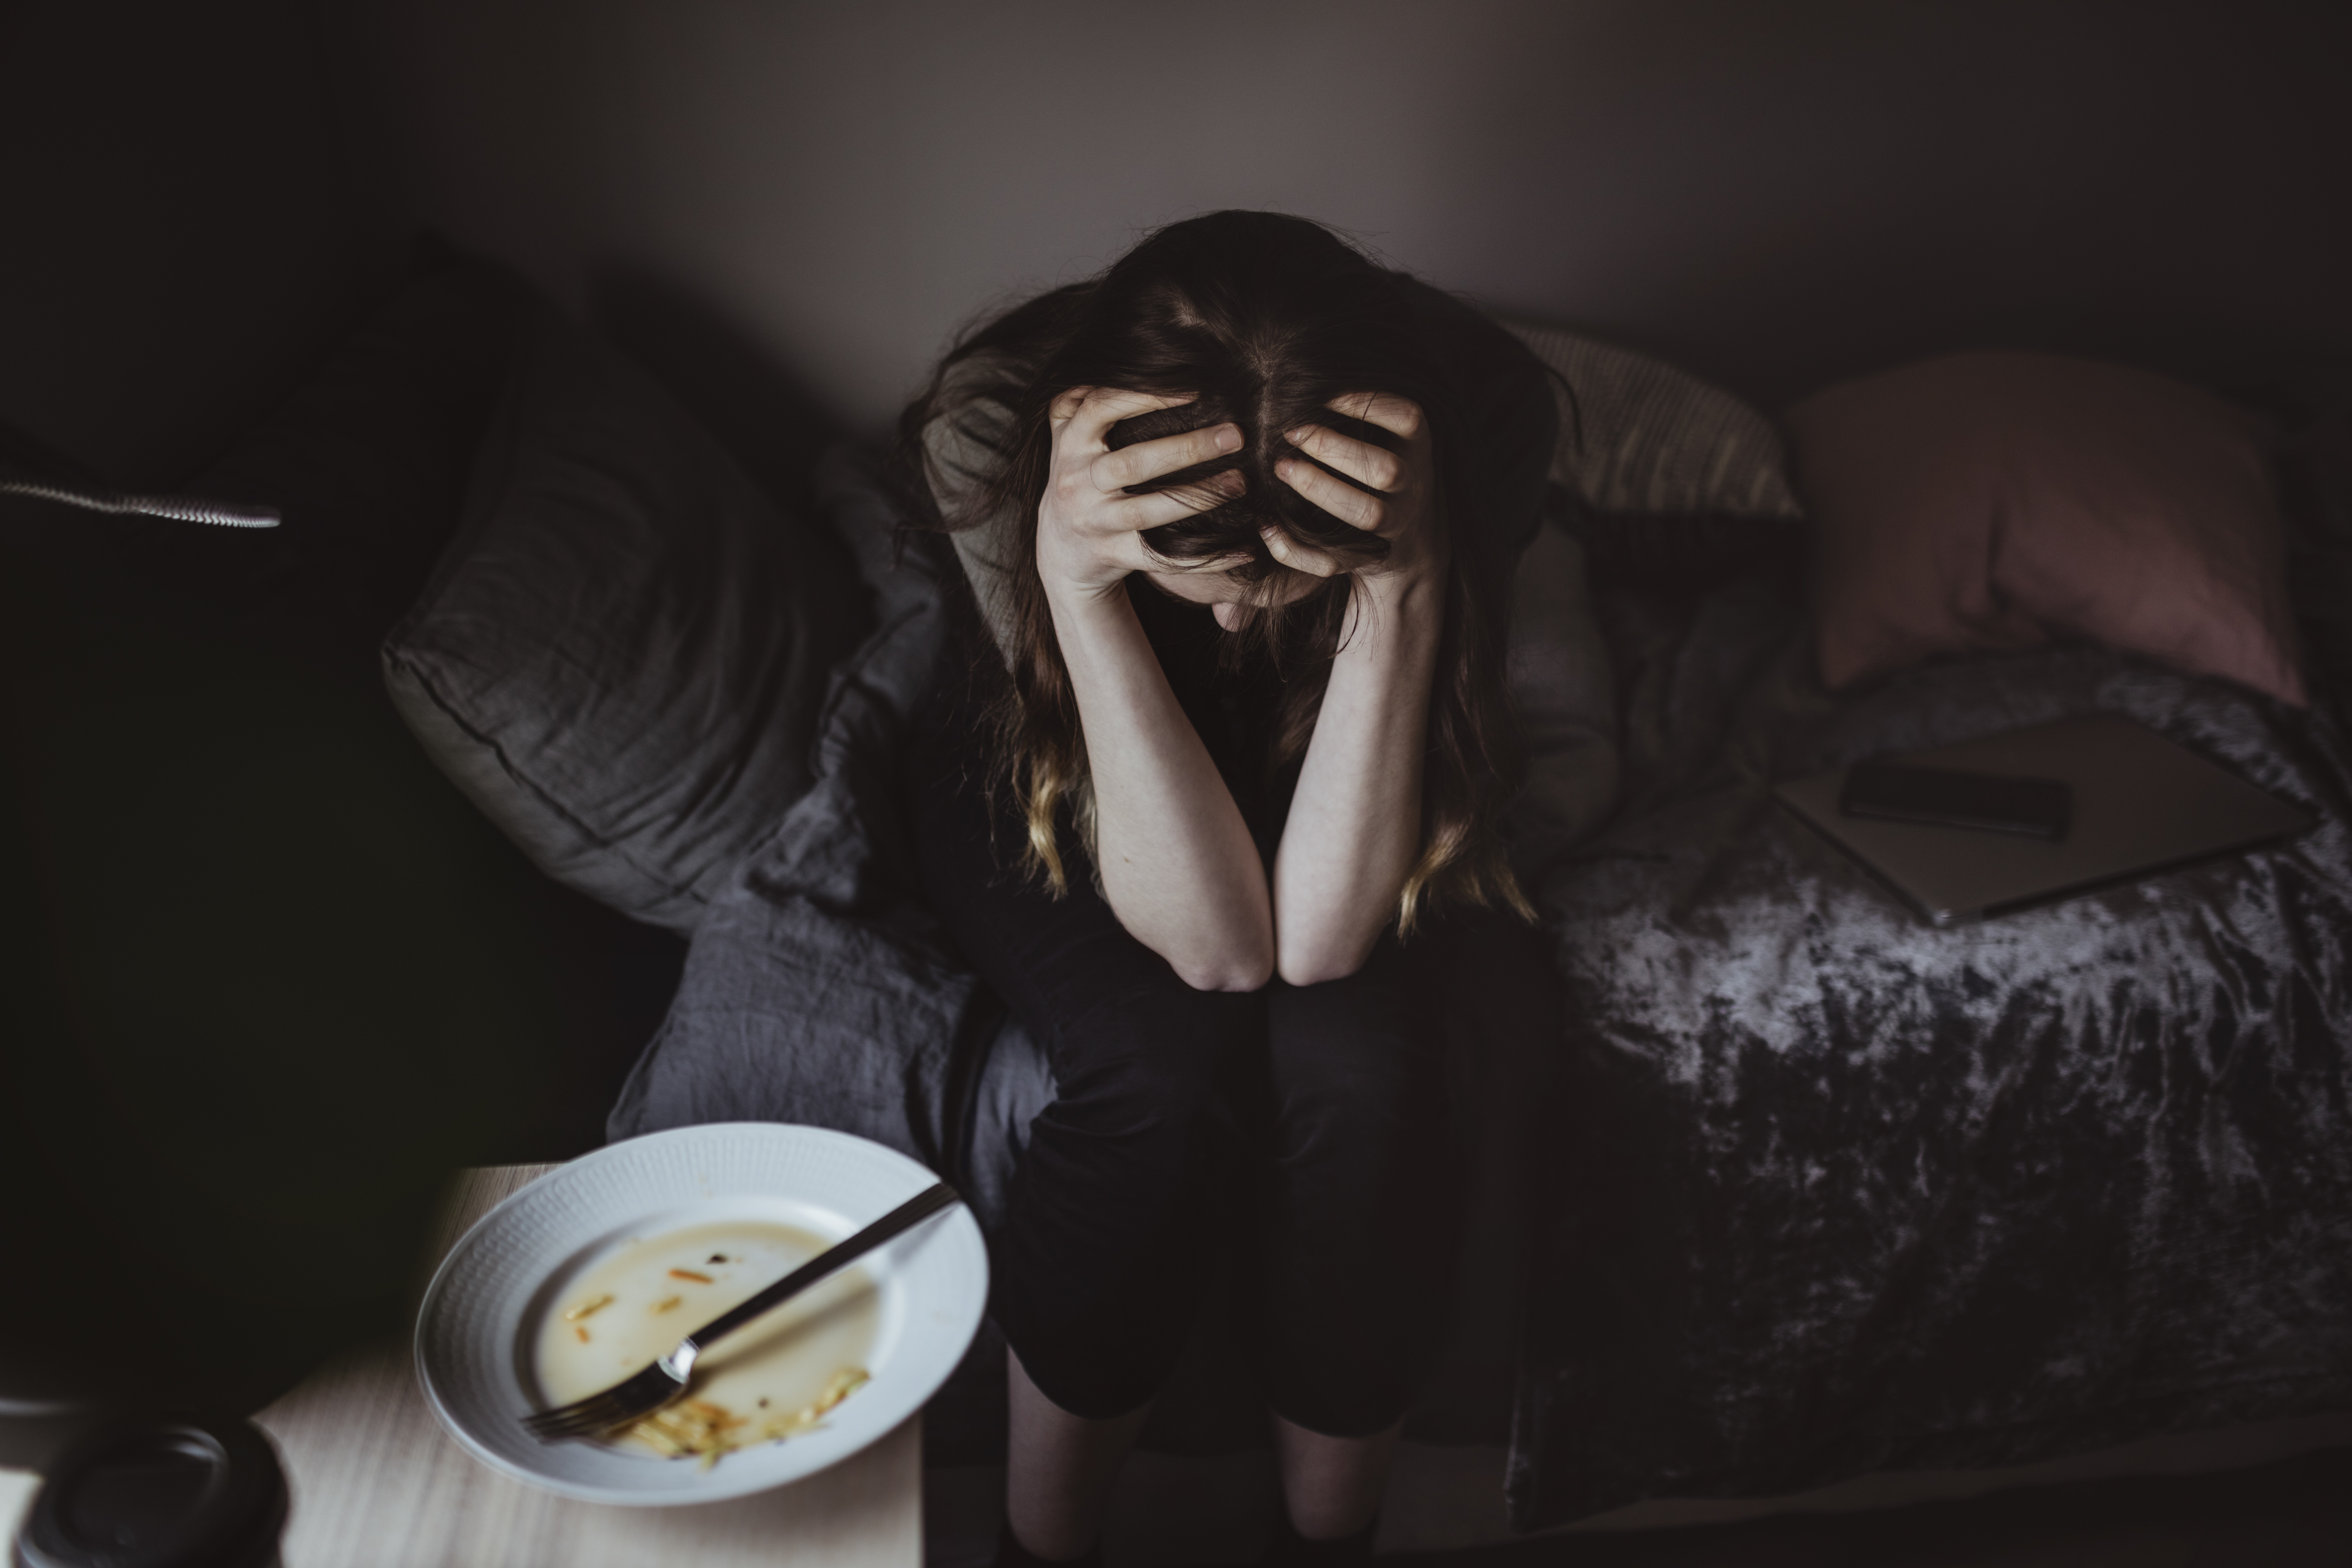 Eating disorder rates jumped ‘significantly’ among adolescents amid COVID: study